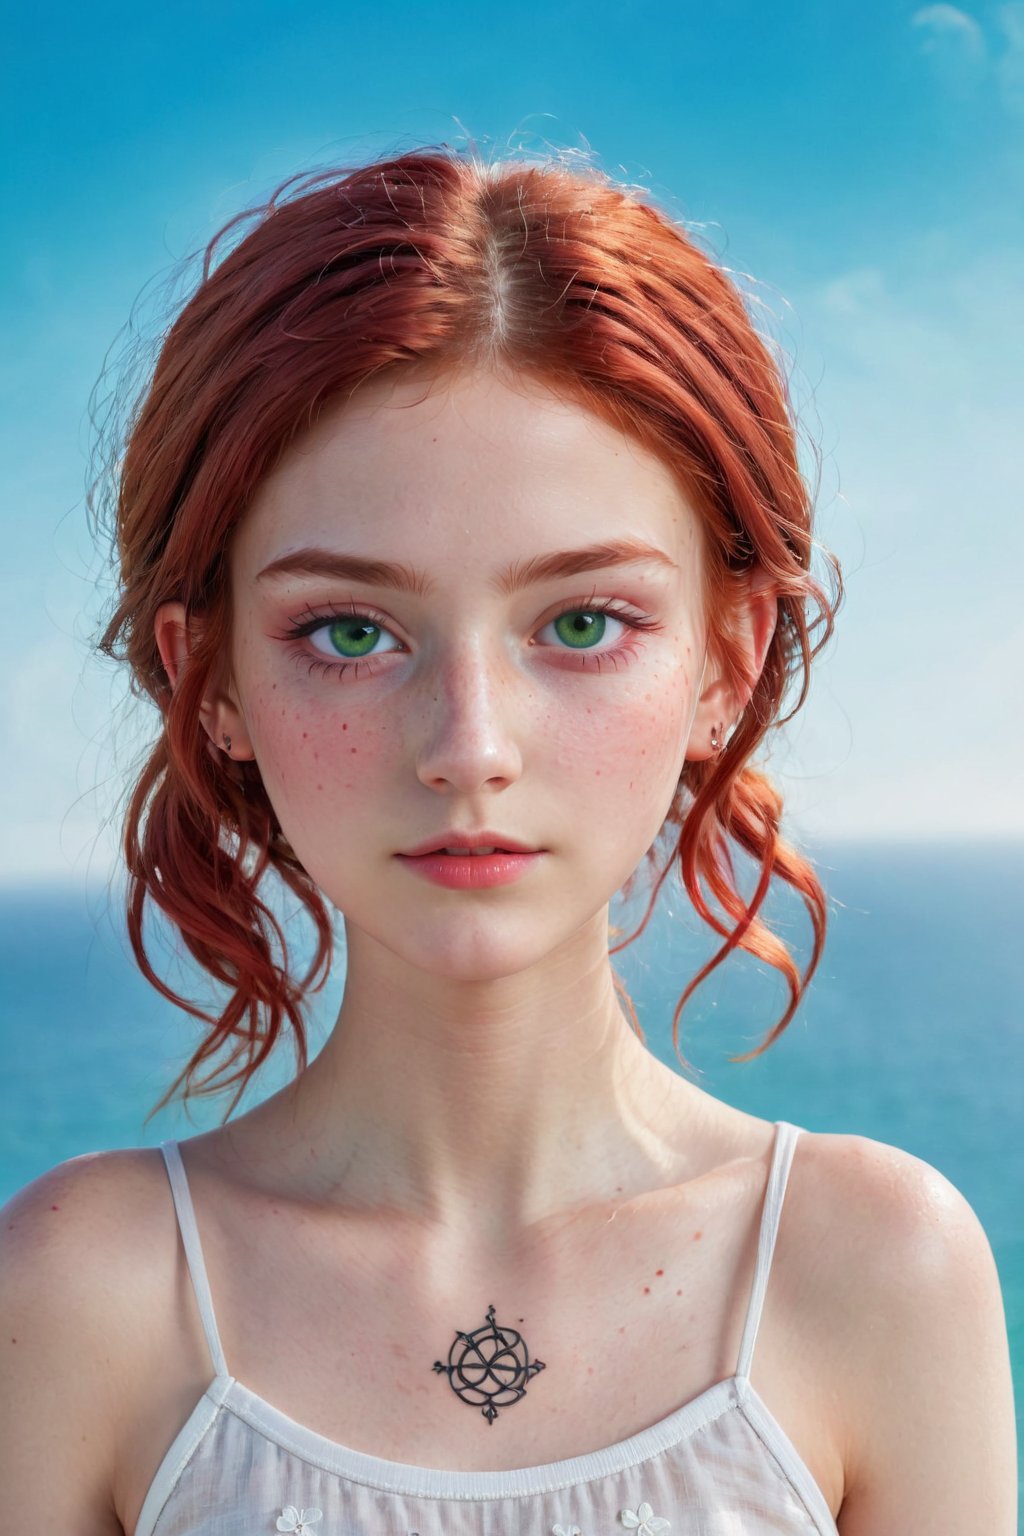 In a (RAW, highest quality) and (extremely detailed 8k CG wallpaper unit), create a (photo-realistic) illustration of a (16-year-old girl) with an extraordinary appearance. This (masterpiece: 1.3) should depict a (short, slender) girl with (red curly hair), (heterochromia - a green right eye and a blue left eye), and a (pale skin) adorned with (detailed freckles). Her (slim, slender body) features (red roses tattoos on the shoulders) and (pagan symbols tattoos on the forearms and hands).